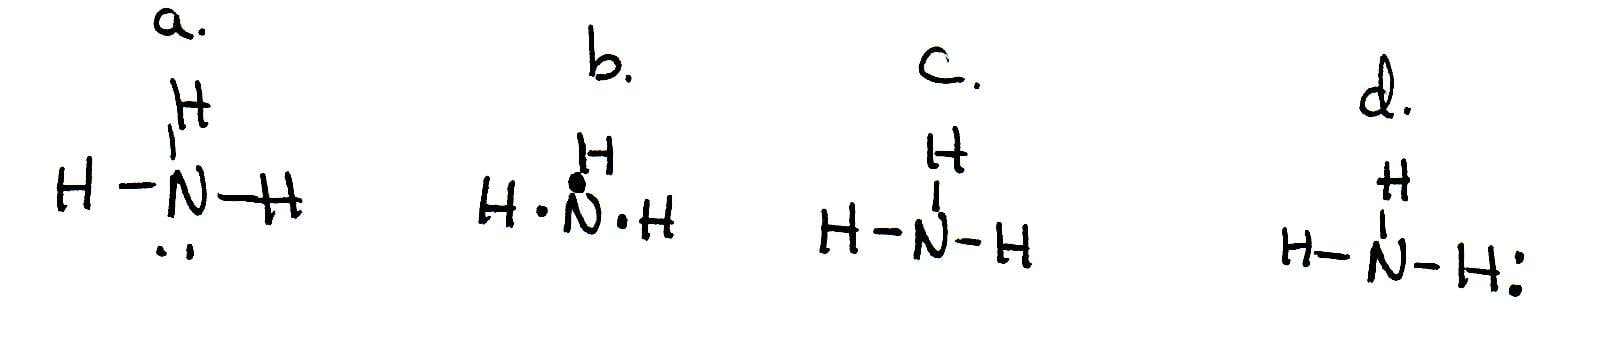 What is the Lewis formula for ammonia (NH3)? 